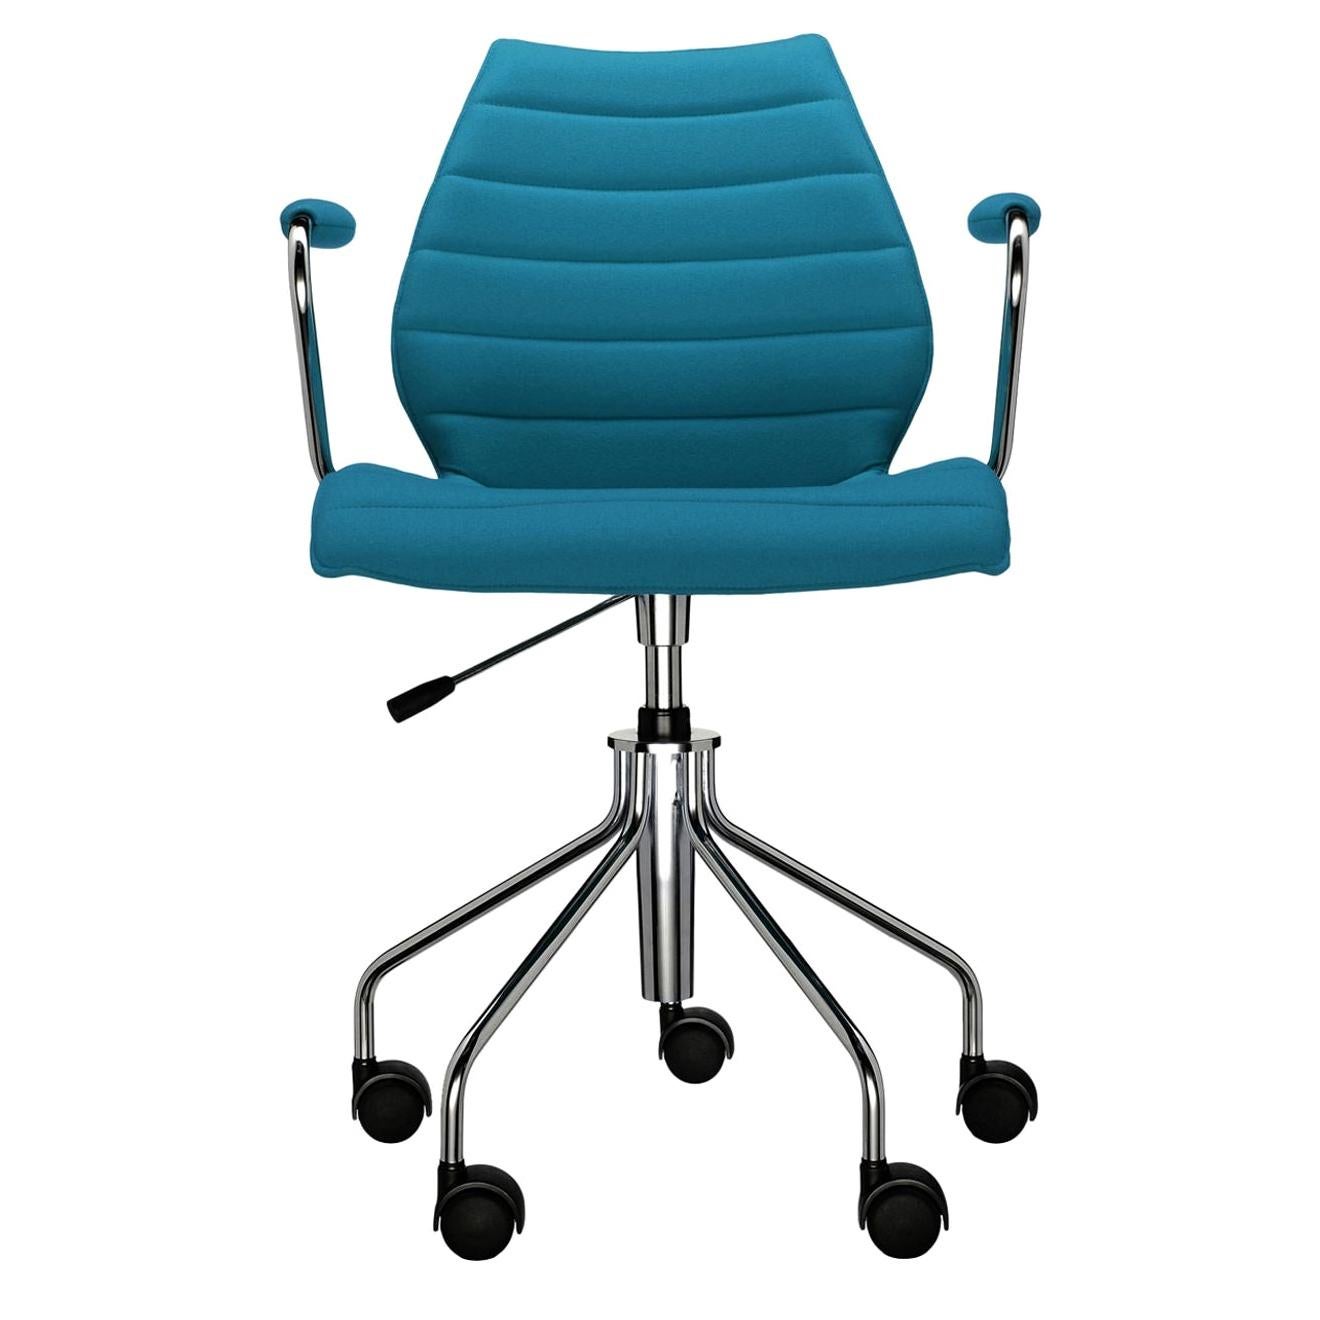 Kartell Maui Soft Trevira ArmChair in Teal by Vico Magistretti